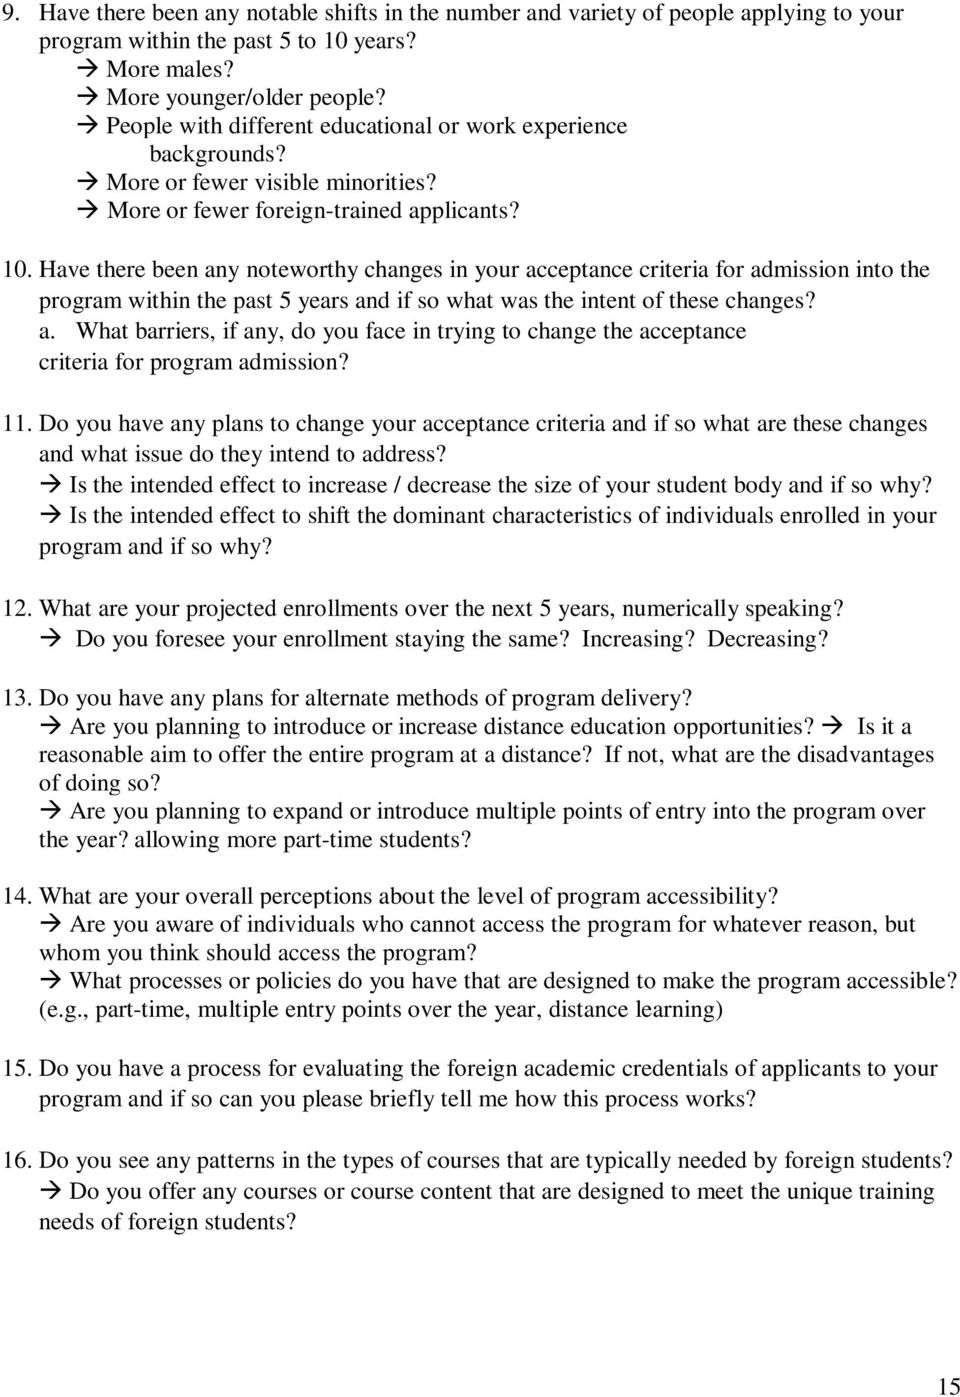 Have there been any noteworthy changes in your acceptance criteria for admission into the program within the past 5 years and if so what was the intent of these changes? a. What barriers, if any, do you face in trying to change the acceptance criteria for program admission?